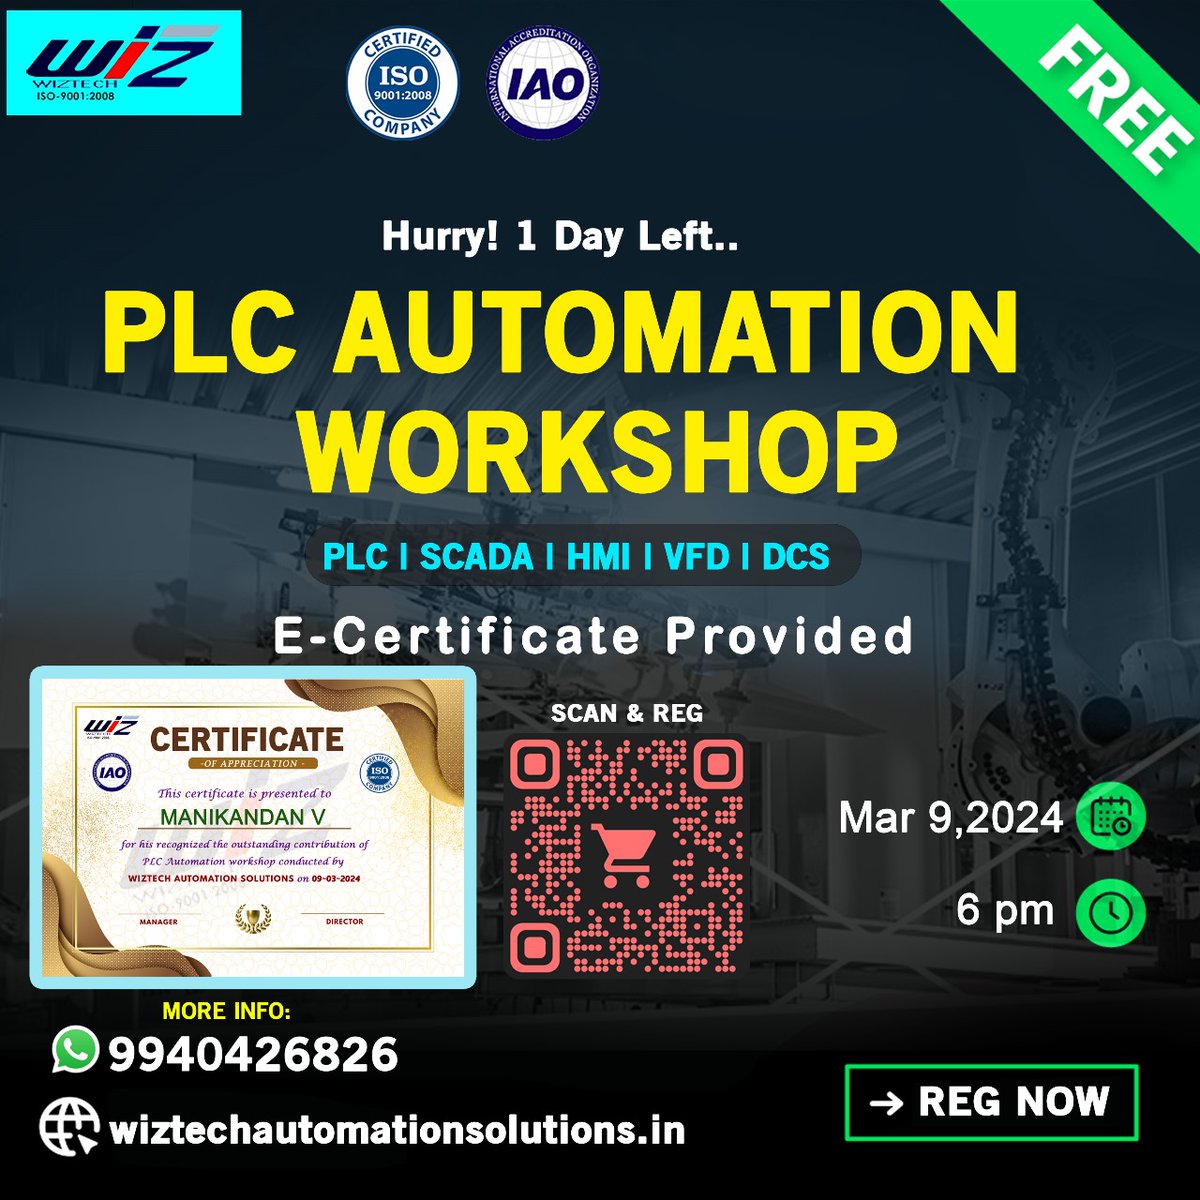 FREE WORKSHOP FOR PLC AUTOMATION WITH CERTIFICATION

Fill out this Form :
forms.gle/iLV9c6wpAcptPs…

Join our Whatsapp to get exclusive updates :
chat.whatsapp.com/FHiGQglYGUP8G0…

#workshop #freeworkshop #plcworkshop #students #engineering #engineeringstudents #plcscada
#bestworkshop